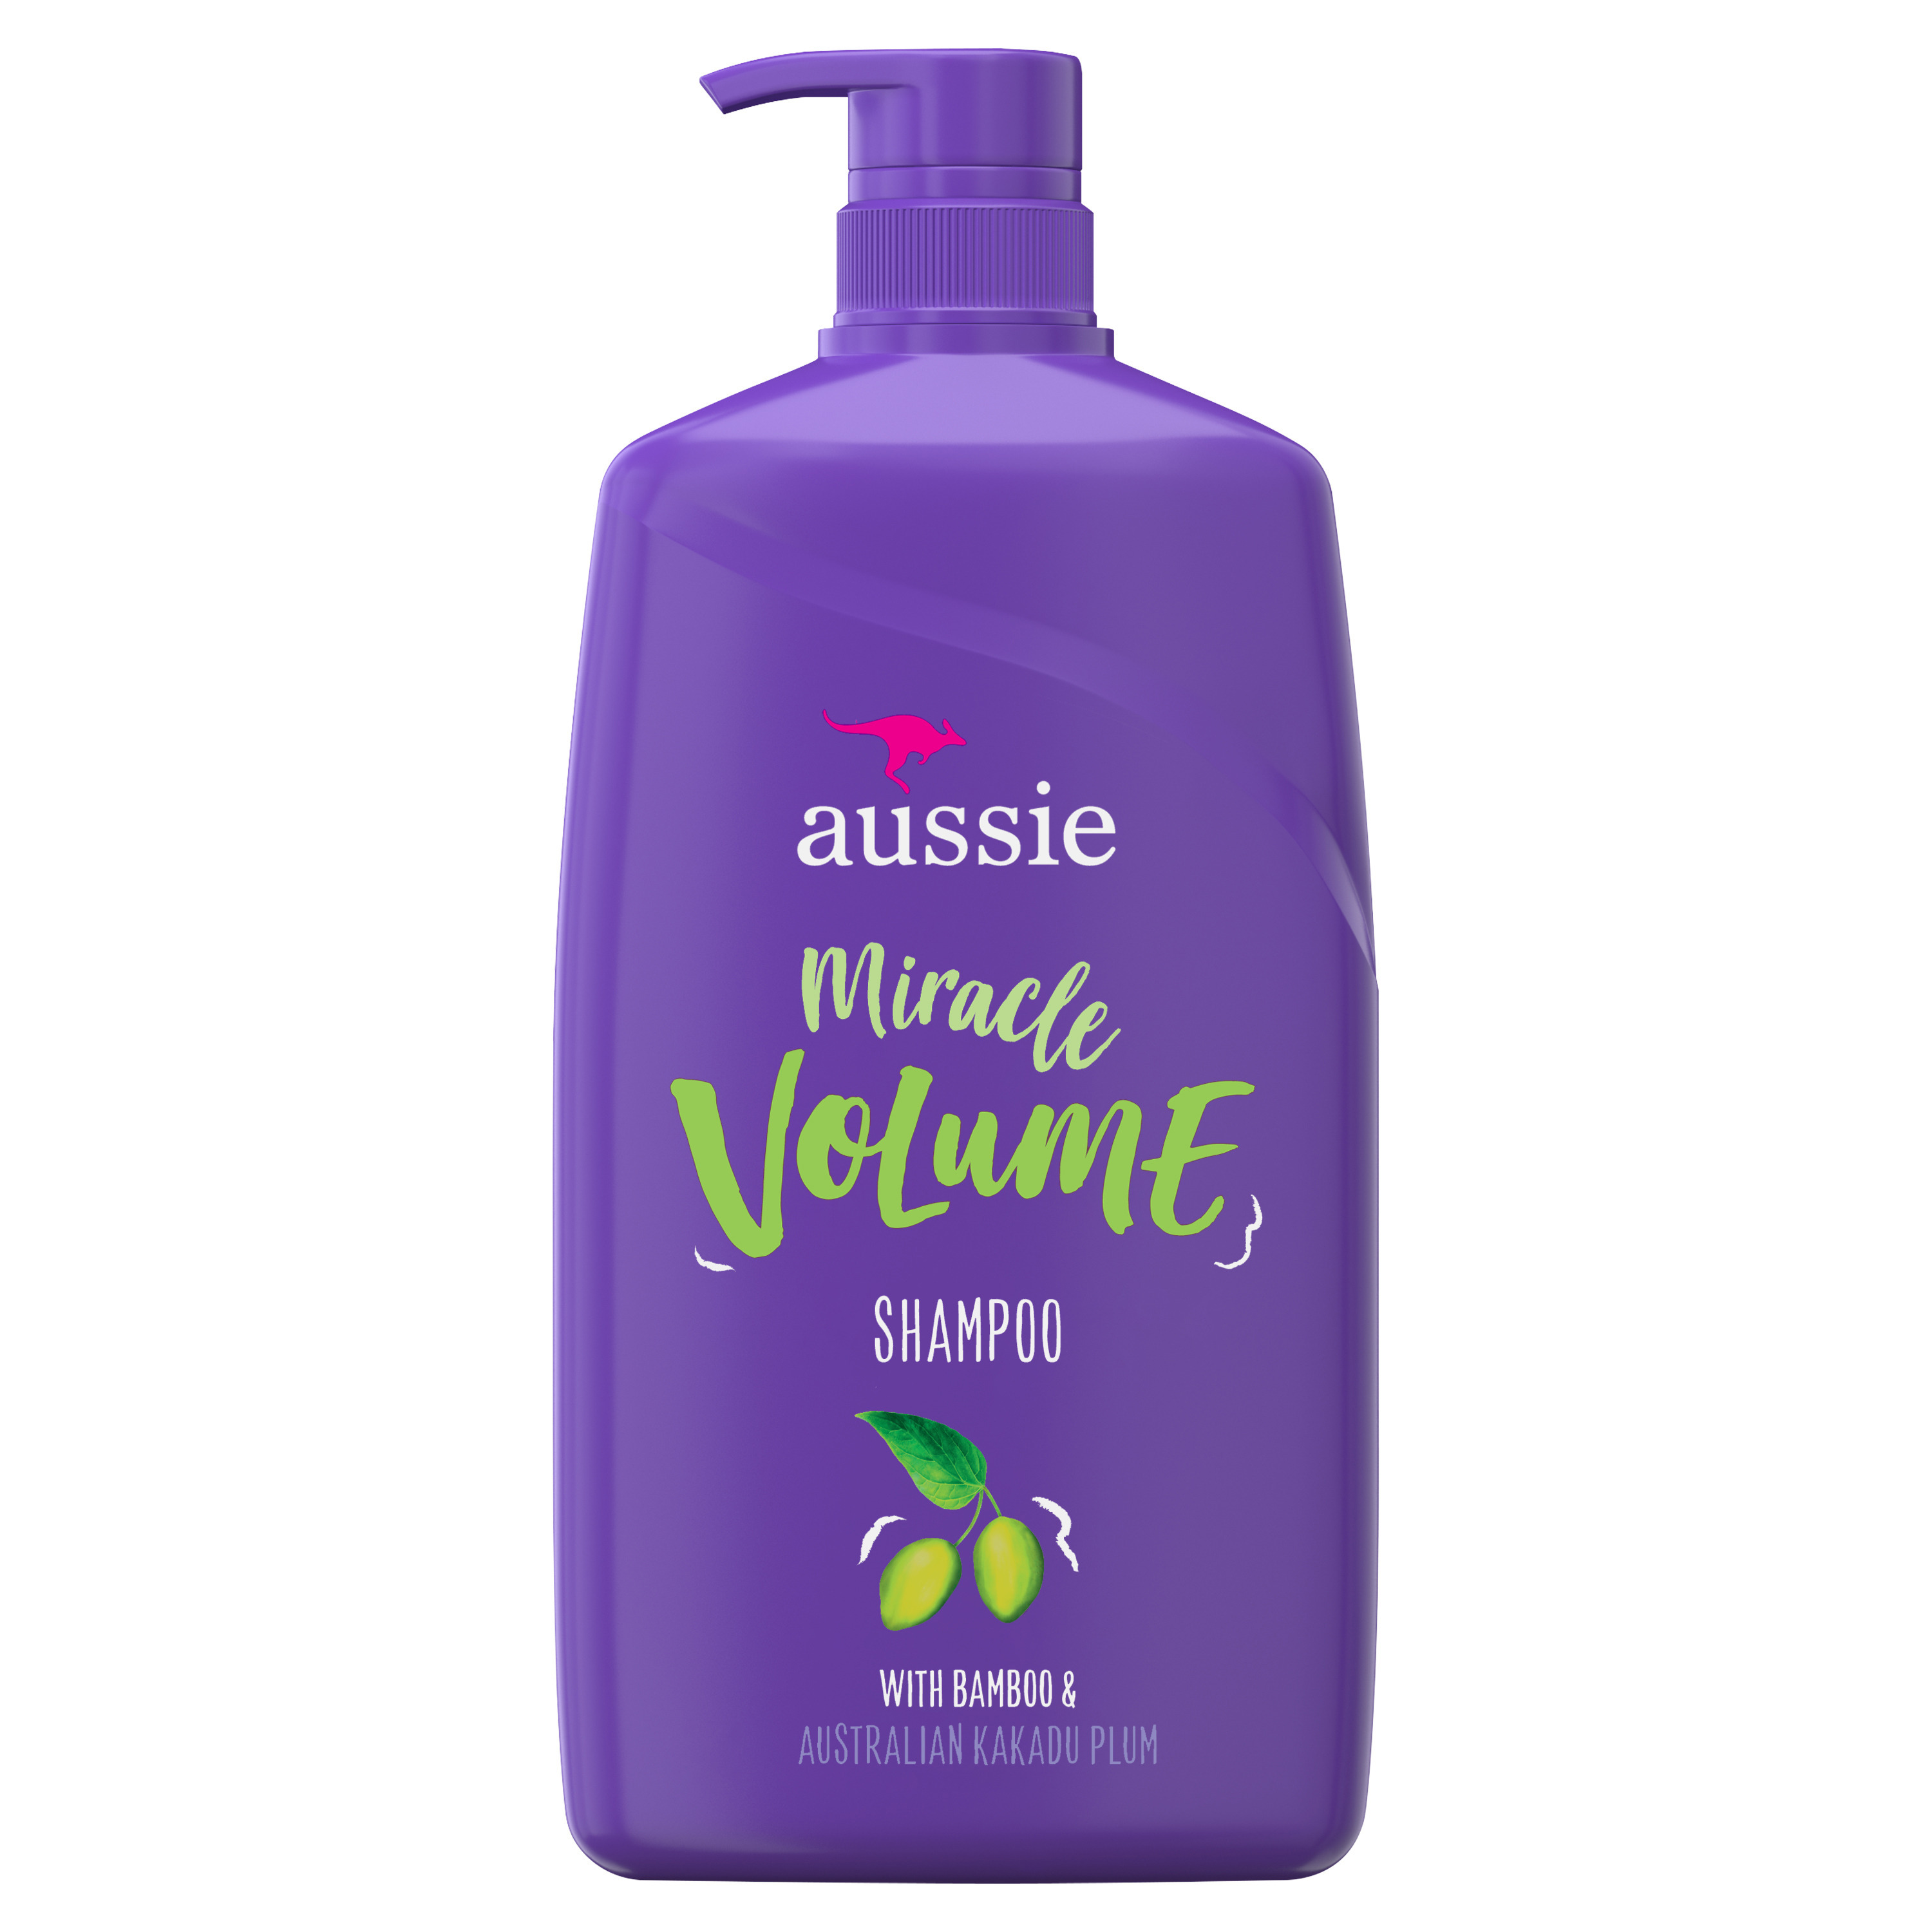 Aussie Miracle Volume with Plum & Bamboo, Paraben Free Shampoo, 26.2 fl oz - image 1 of 10